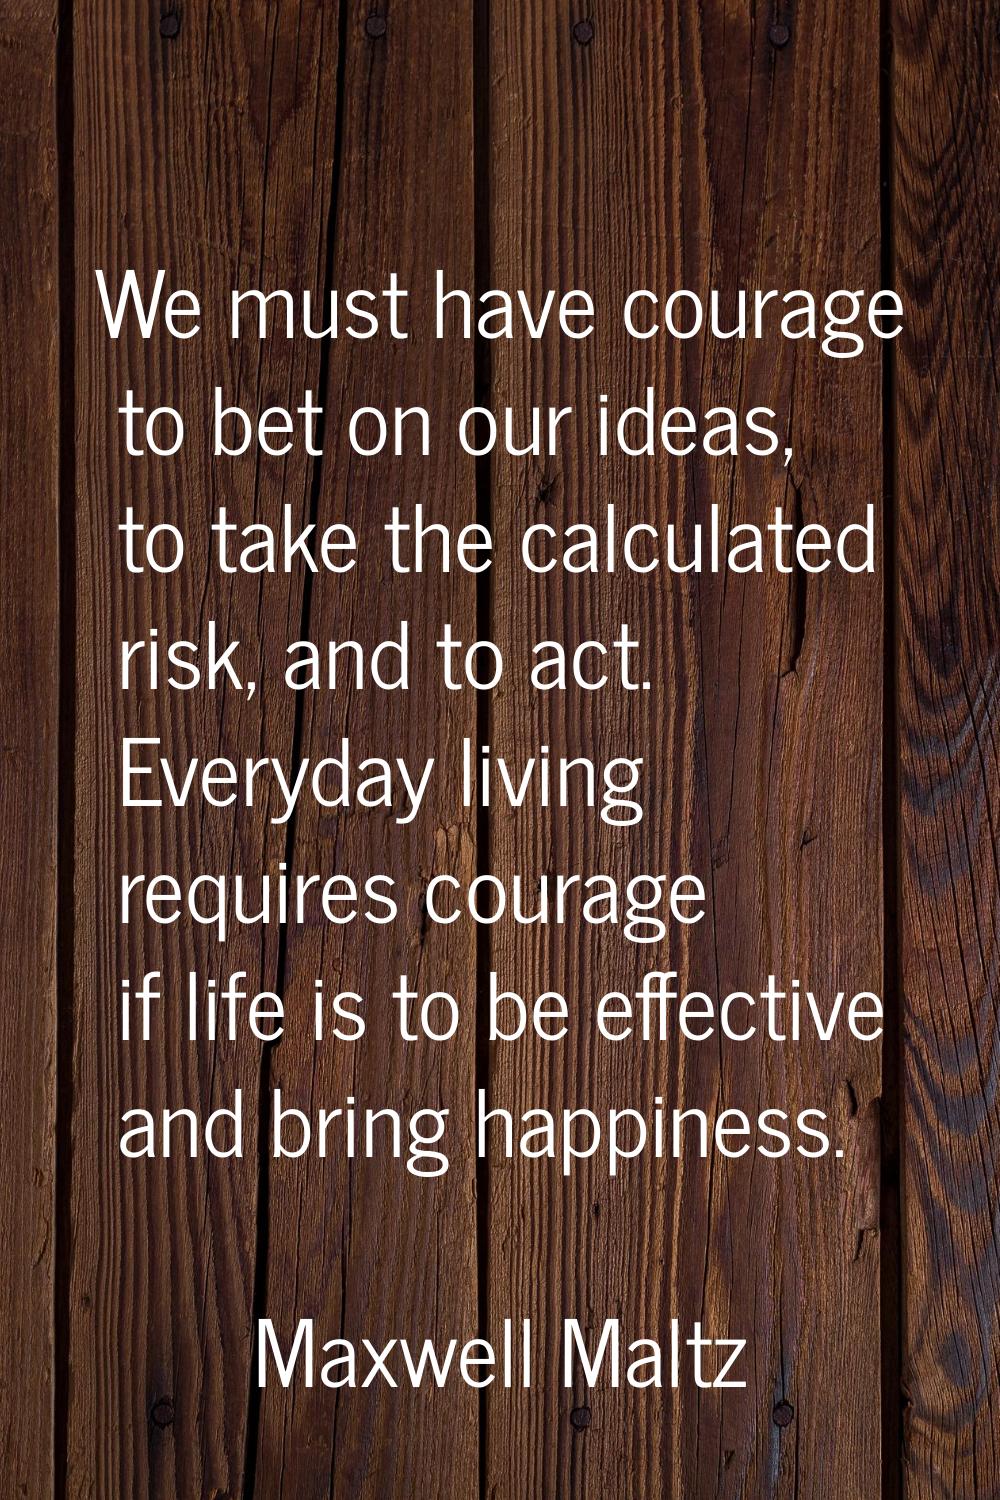 We must have courage to bet on our ideas, to take the calculated risk, and to act. Everyday living 